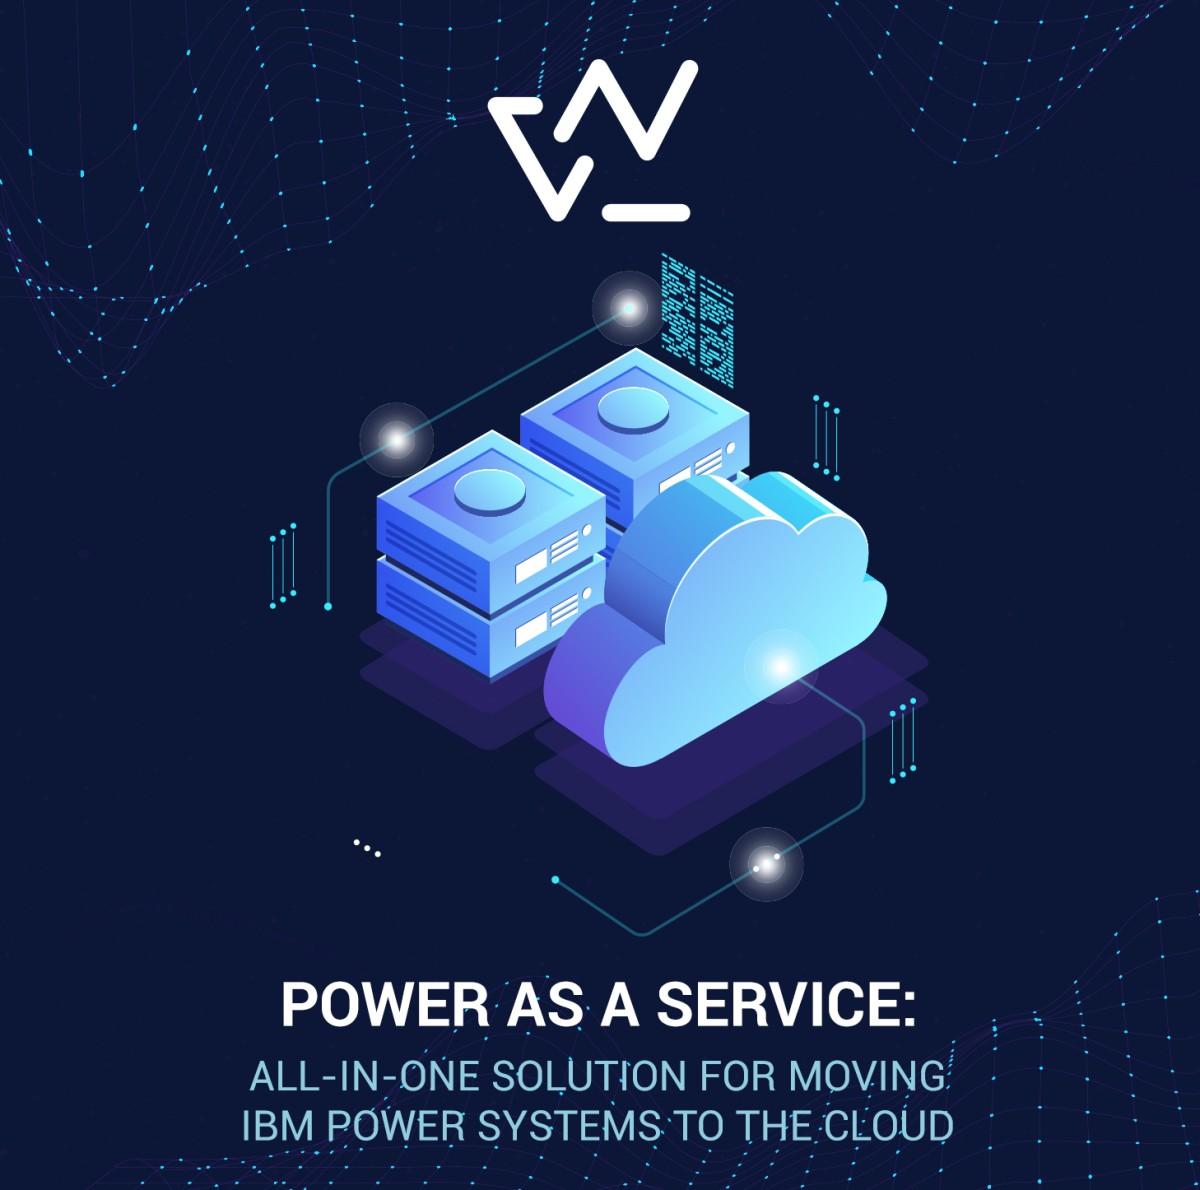 POWER AS A SERVICE: ALL-IN-ONE SOLUTION FOR MOVING IBM POWER SYSTEMS TO THE CLOUD